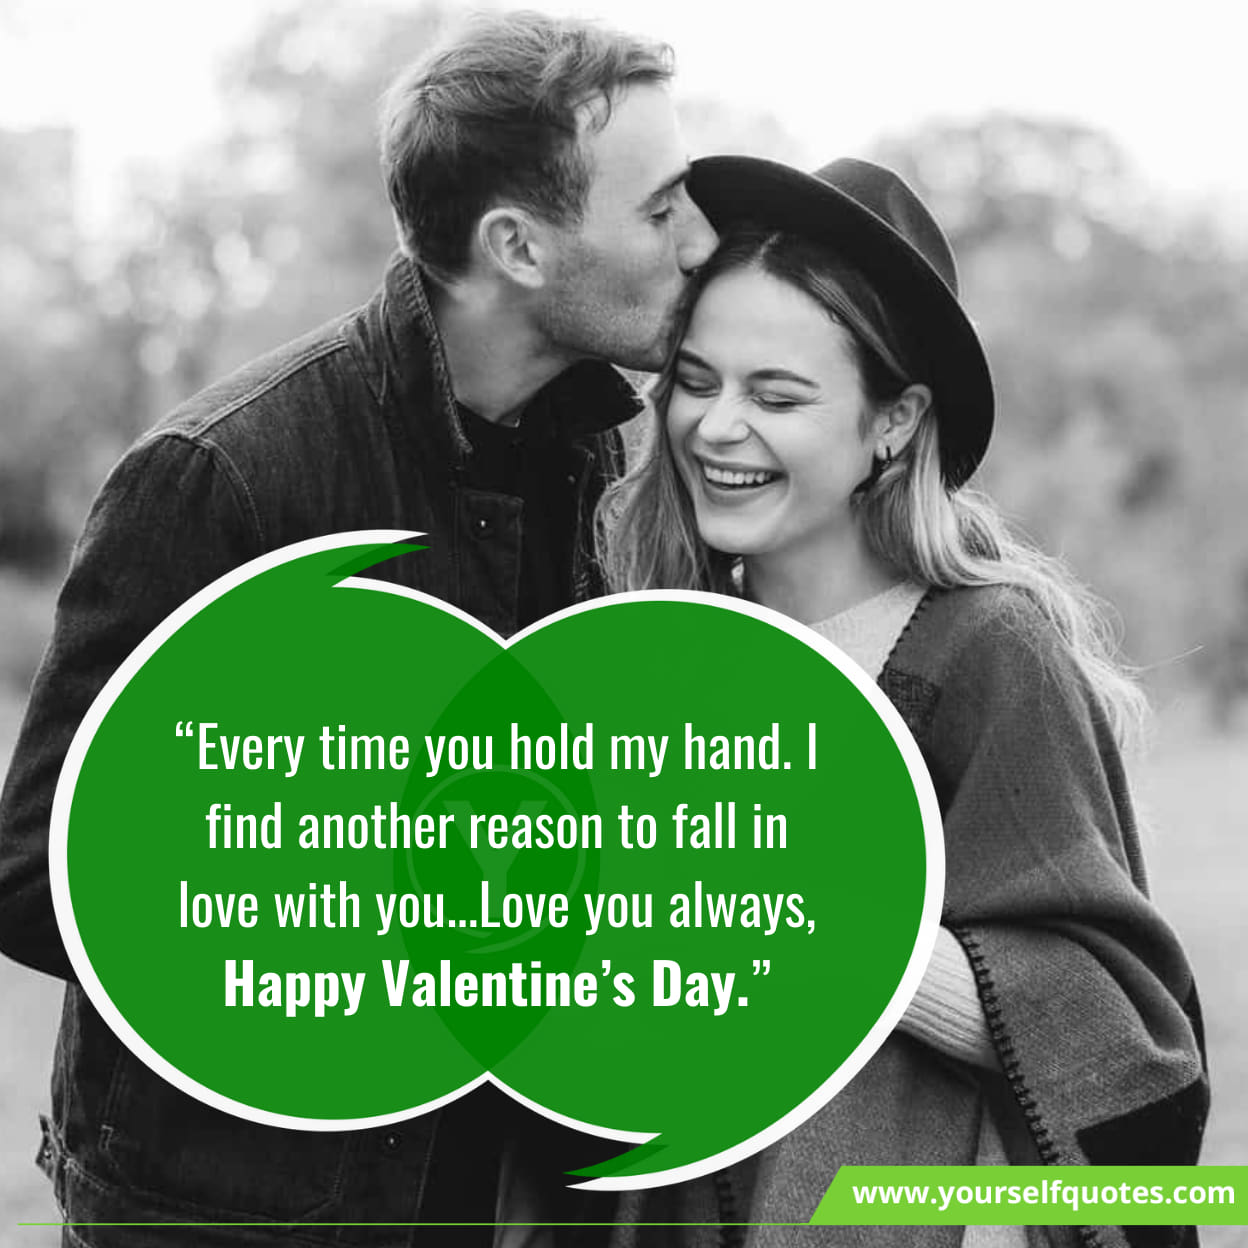 Valentines Day Messages, Sayings & Greetings